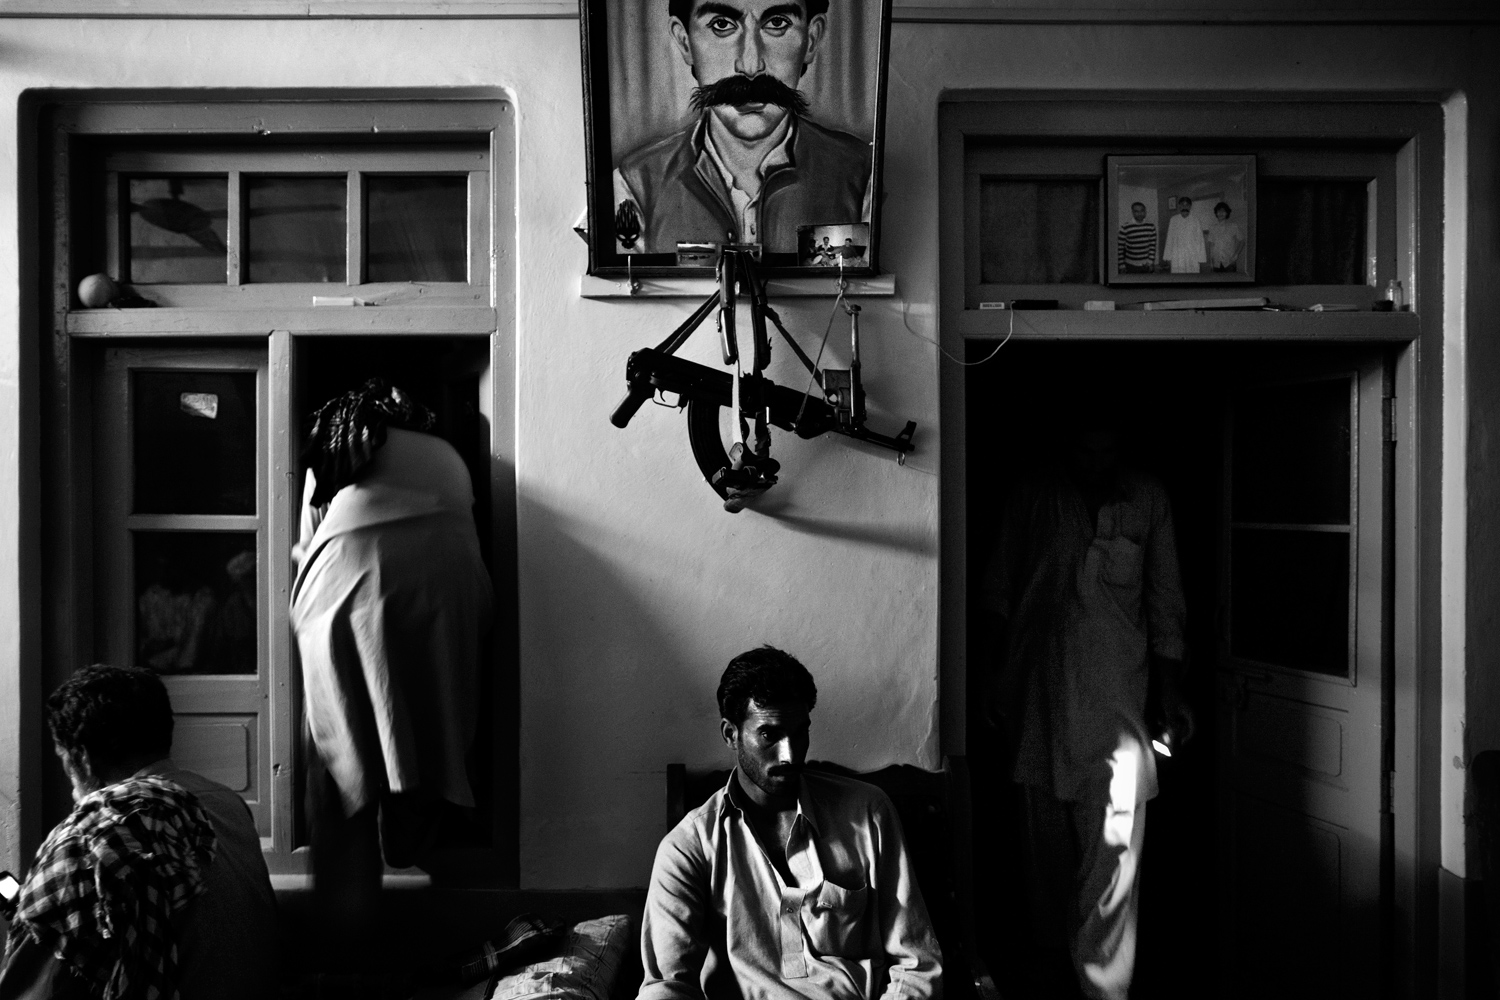 Pakistan, Swat Valley, Bara Bandai, November 2010. Lashkar members making preparations for pehra (night patrol) at the hujra of tribal elder Ahmed Khan, whose portrait is on the wall. In Pashtun culture a hujra is a place where tribal elders assemble to discuss different issues, sometimes holding meetings, called jirga, to settle any sort of dispute or evolve future strategies.